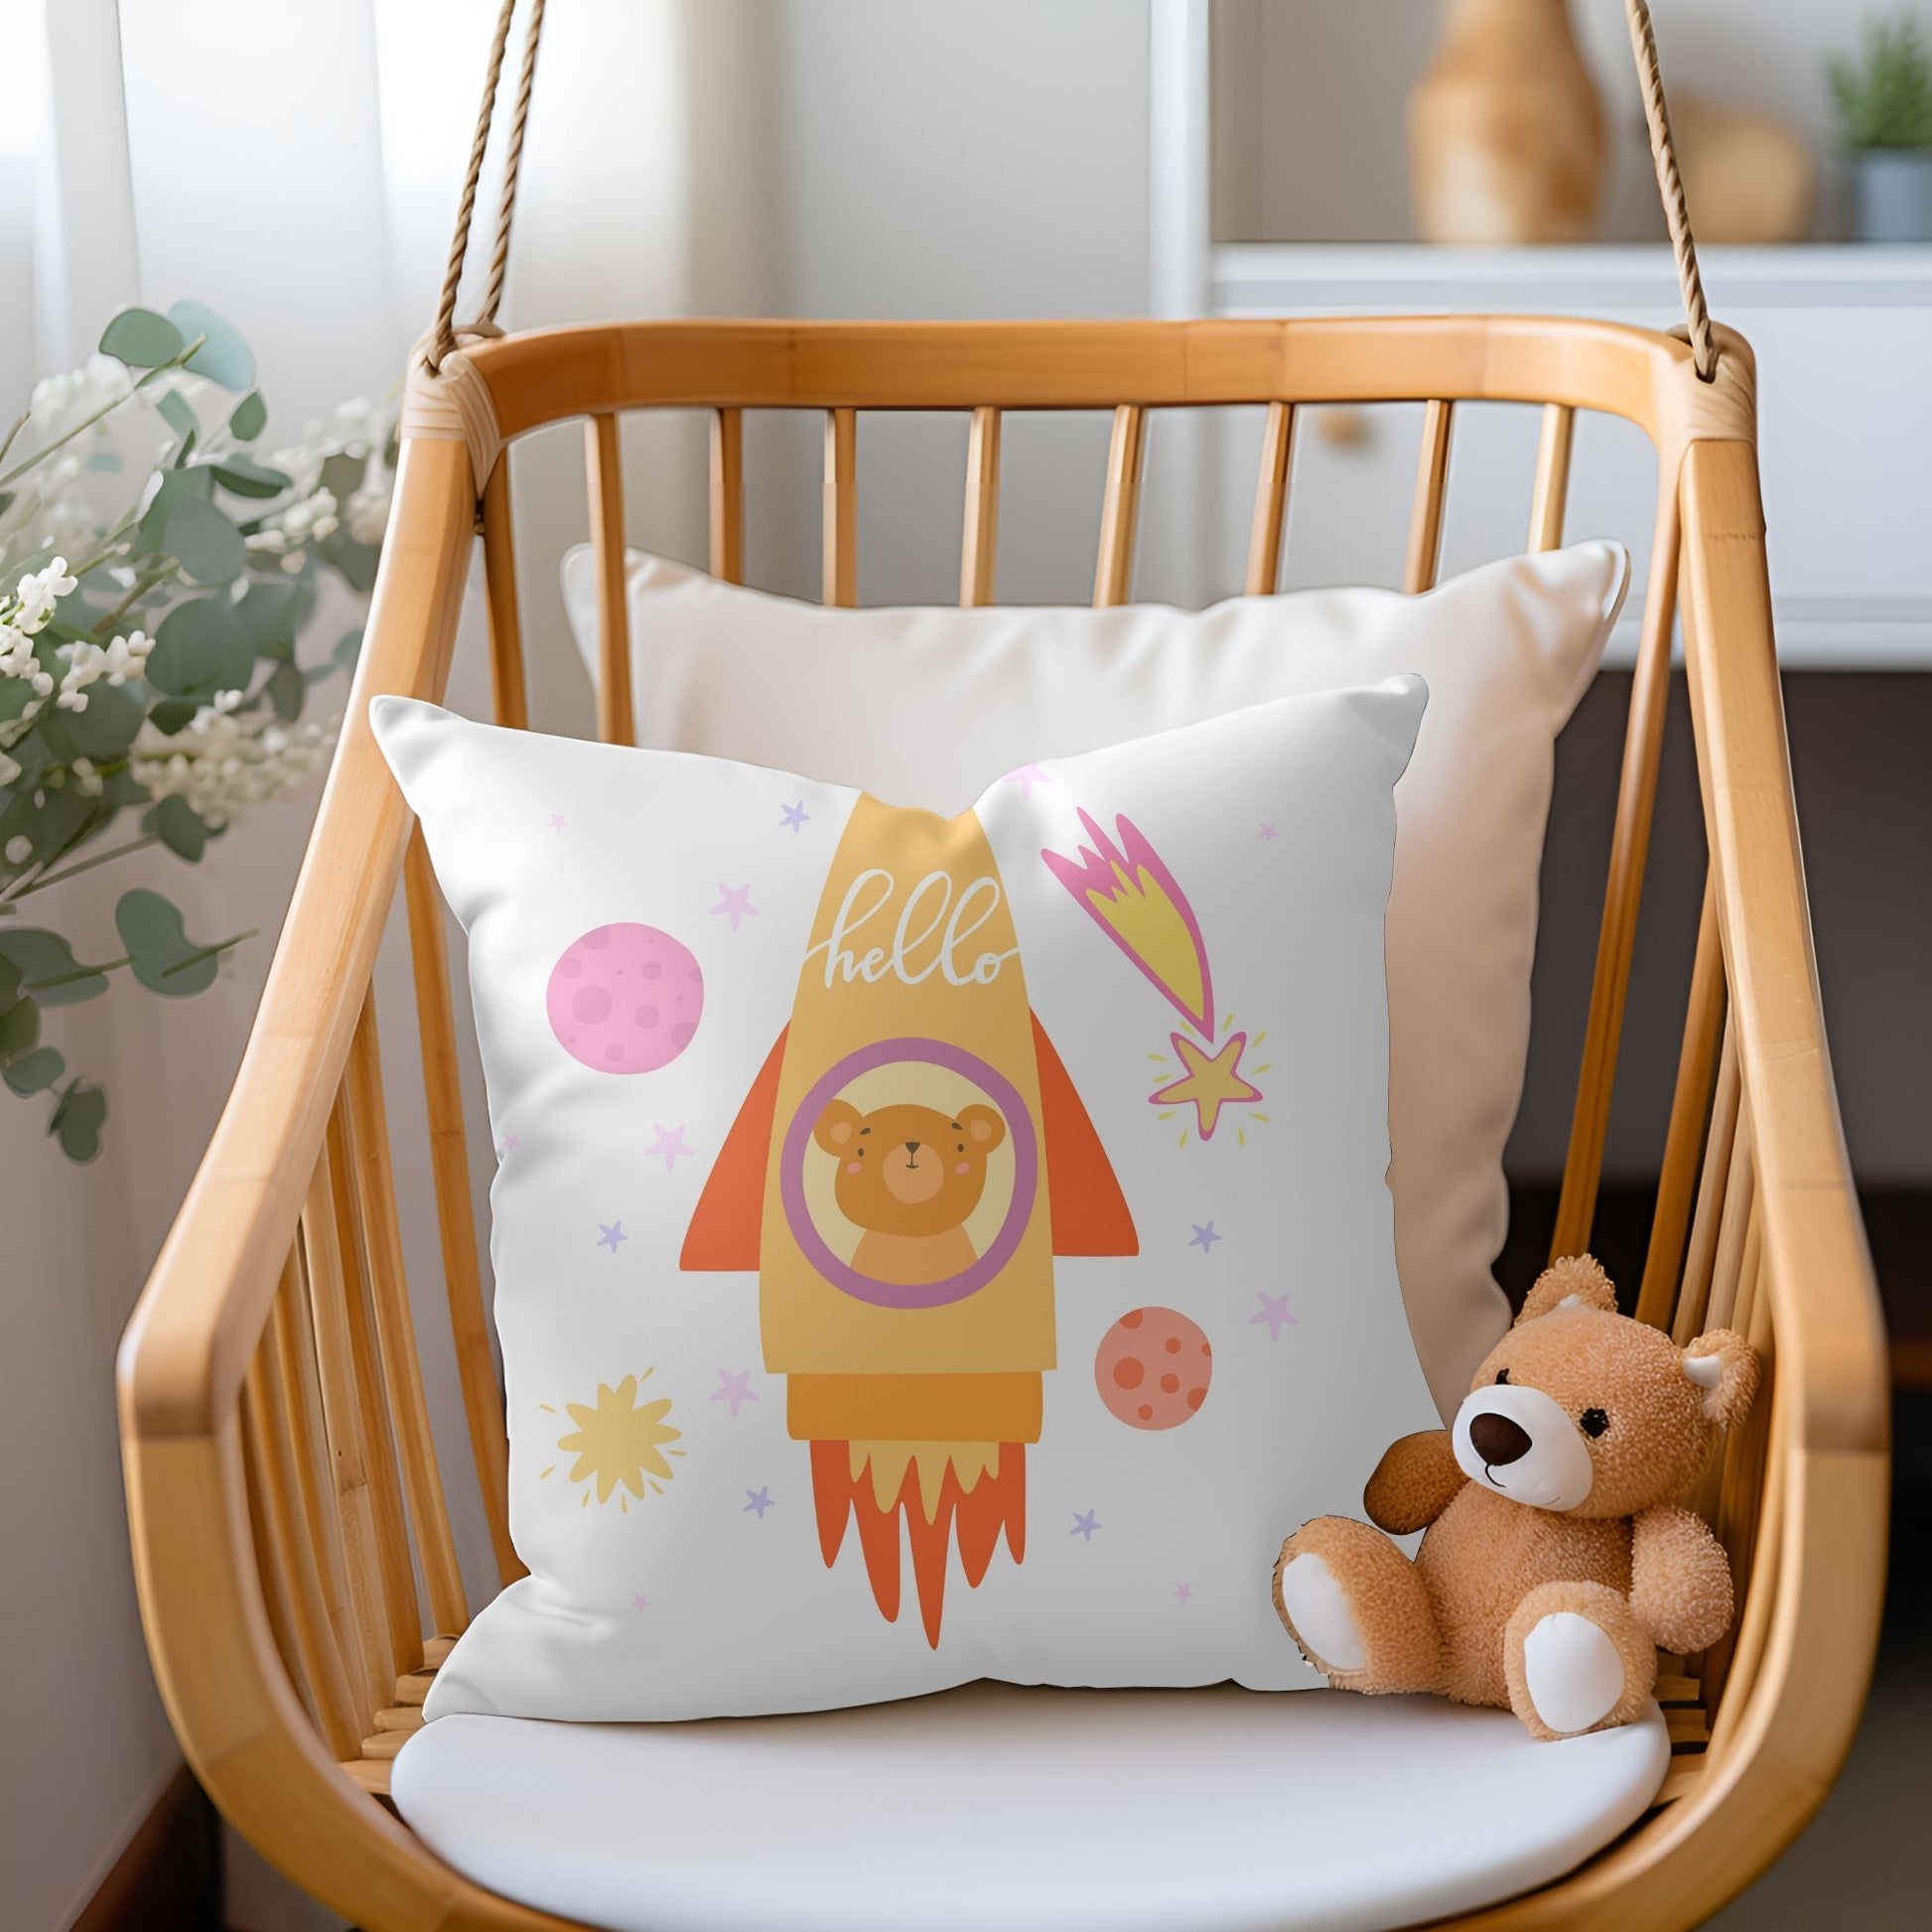 Irresistibly cute bear-in-the-rocket baby pillow for nursery decor.